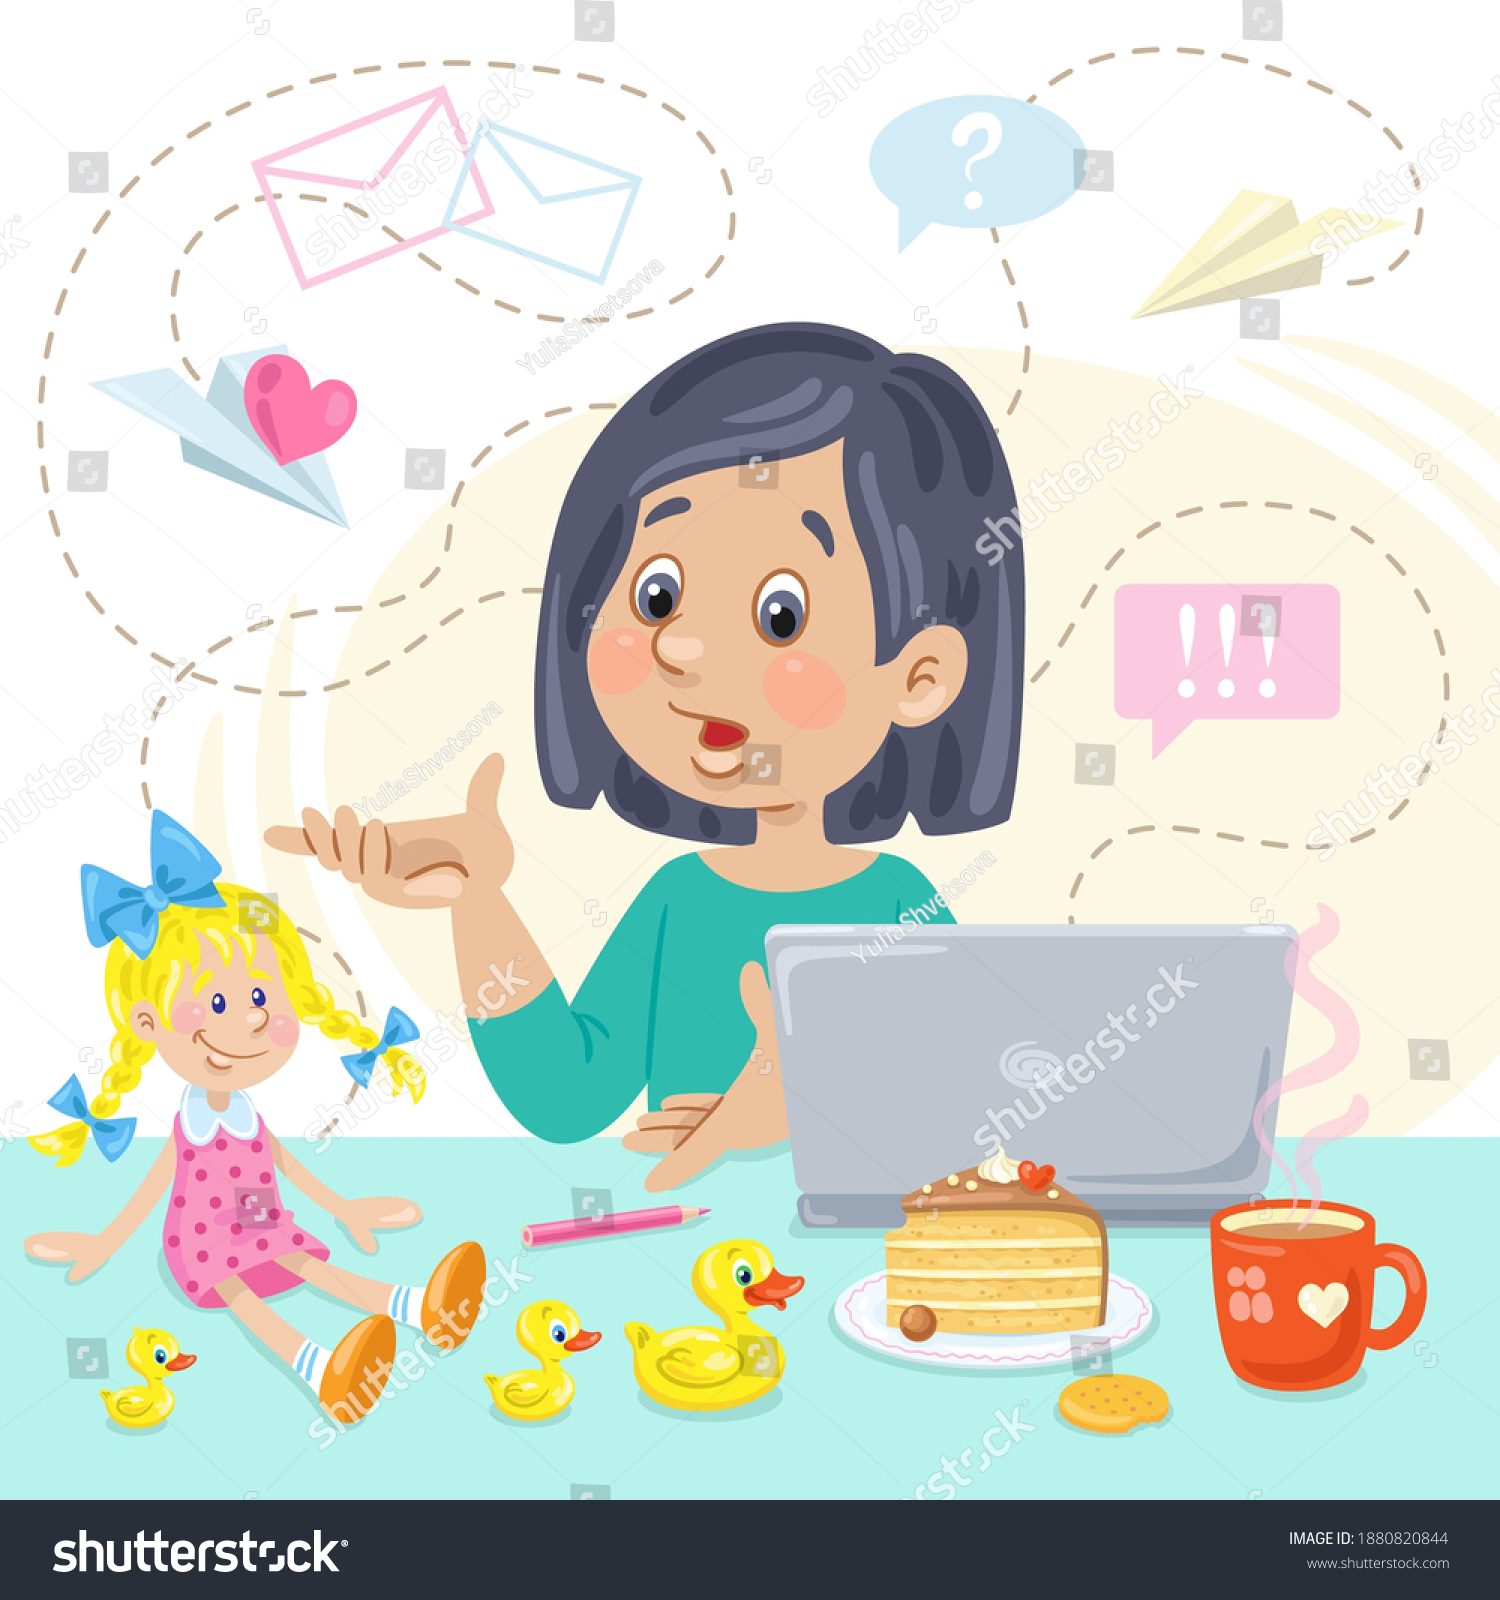 SVG of Online education for children. Cute girl with laptop, food and toys. In cartoon style. Isolated on white background. Vector flat illustration. svg